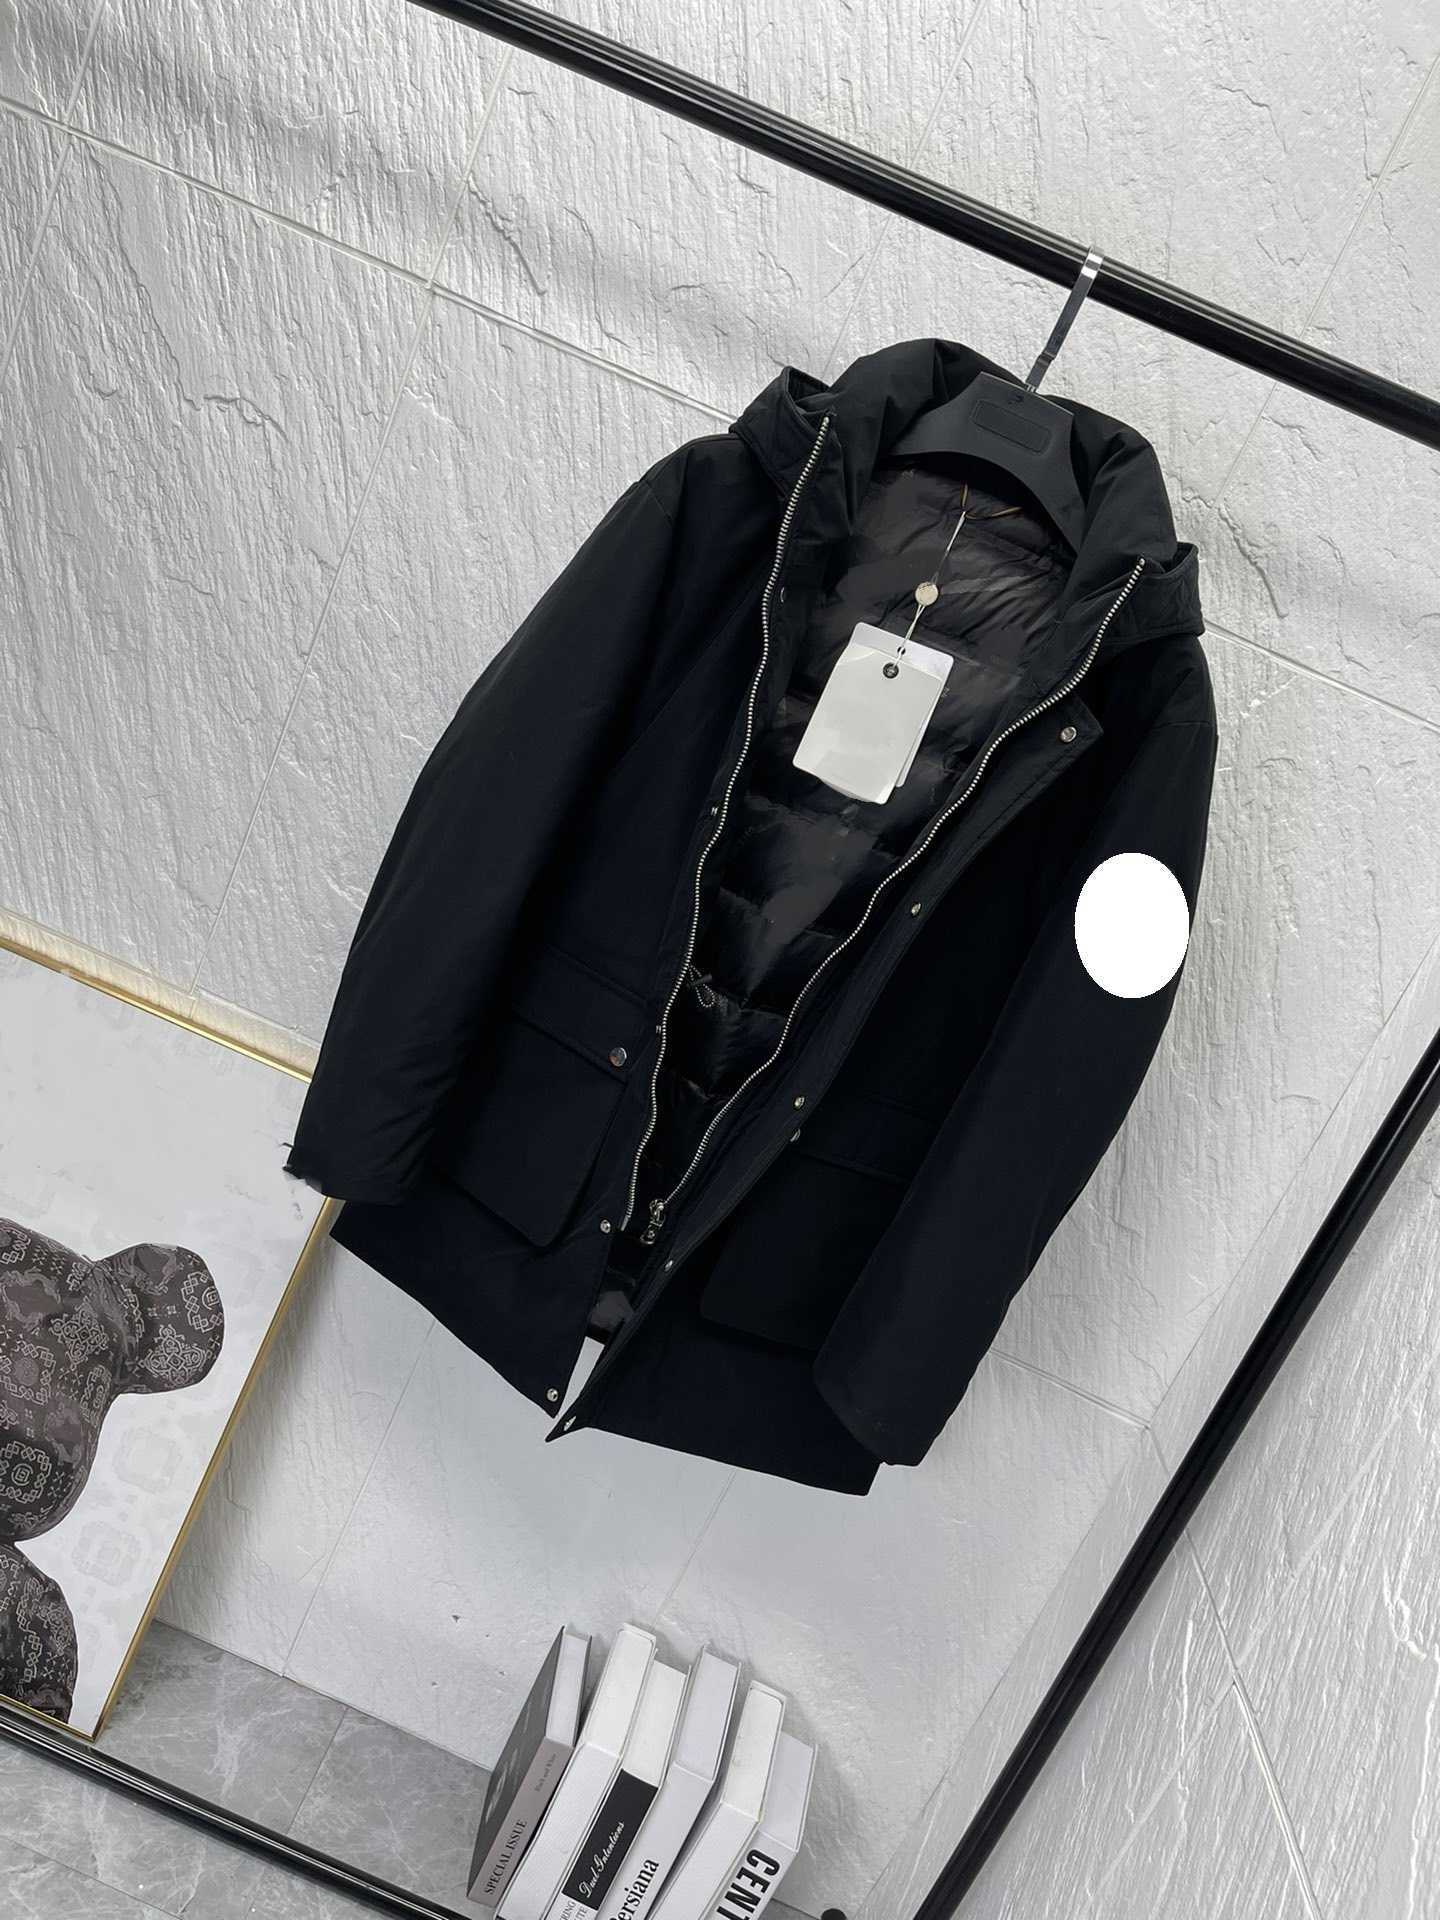 Autumn and winter explosion, new long hooded loose and thick down jacket, high-density sewing anti-run cotton, warm and cold resistance is excellent.